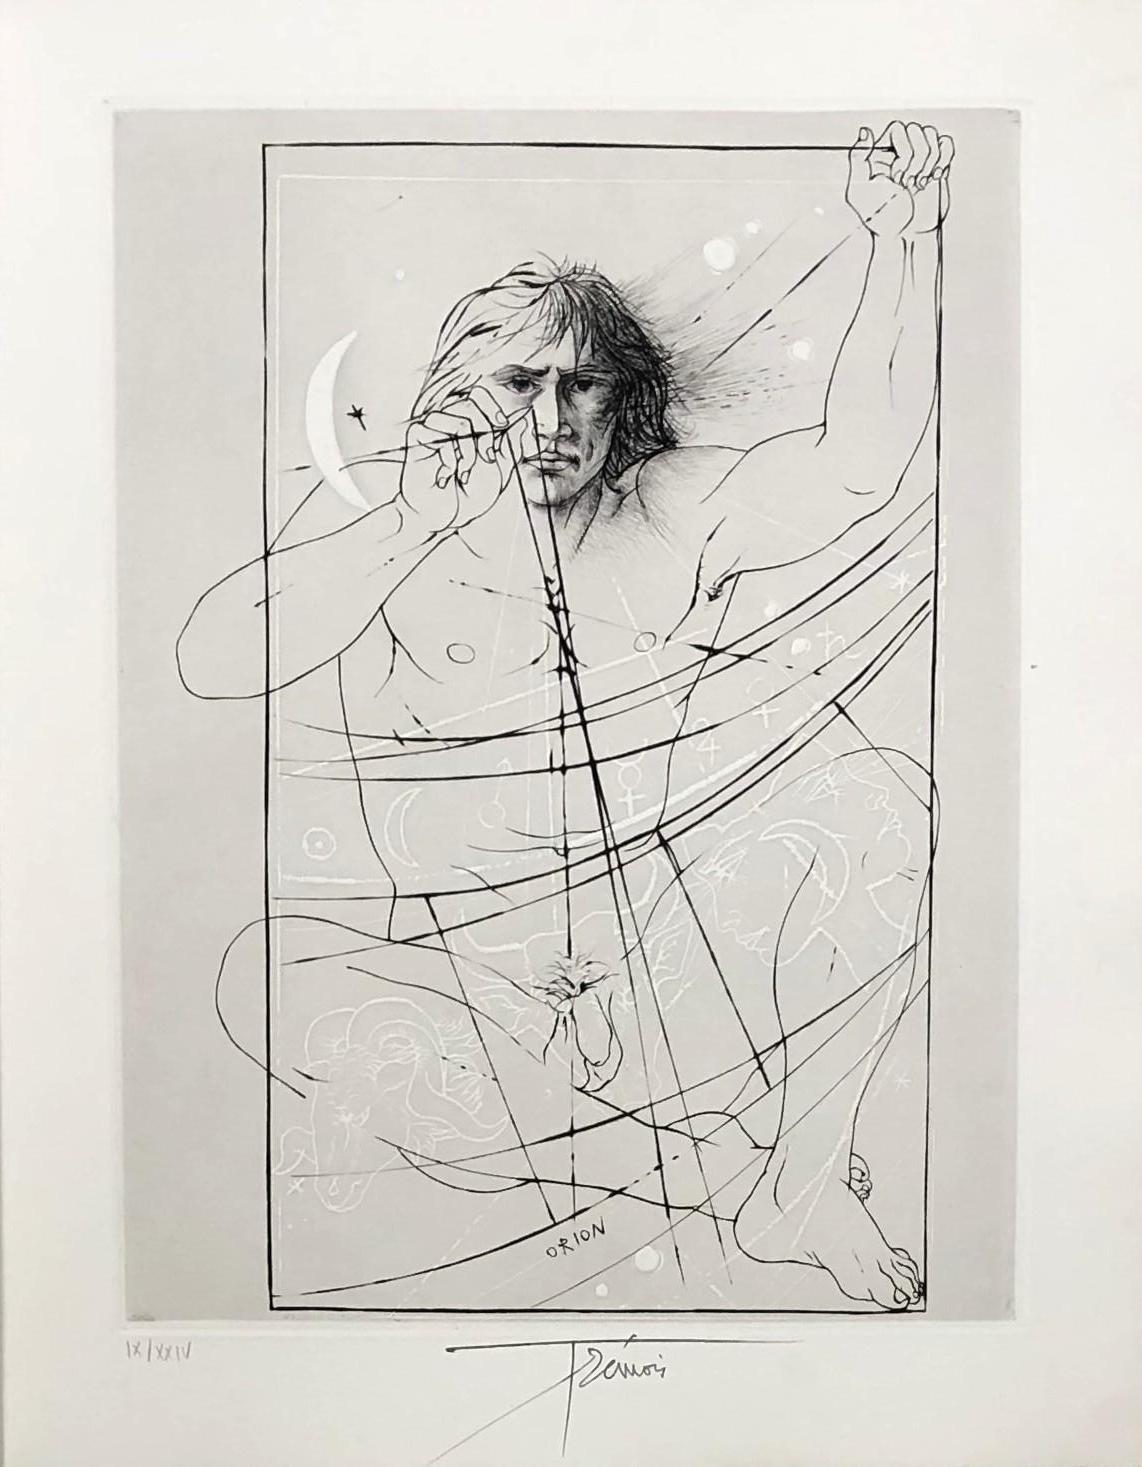 Pierre-Yves Trémois Figurative Print - A Scientist Studying Orion - Original etching handsigned and numbered